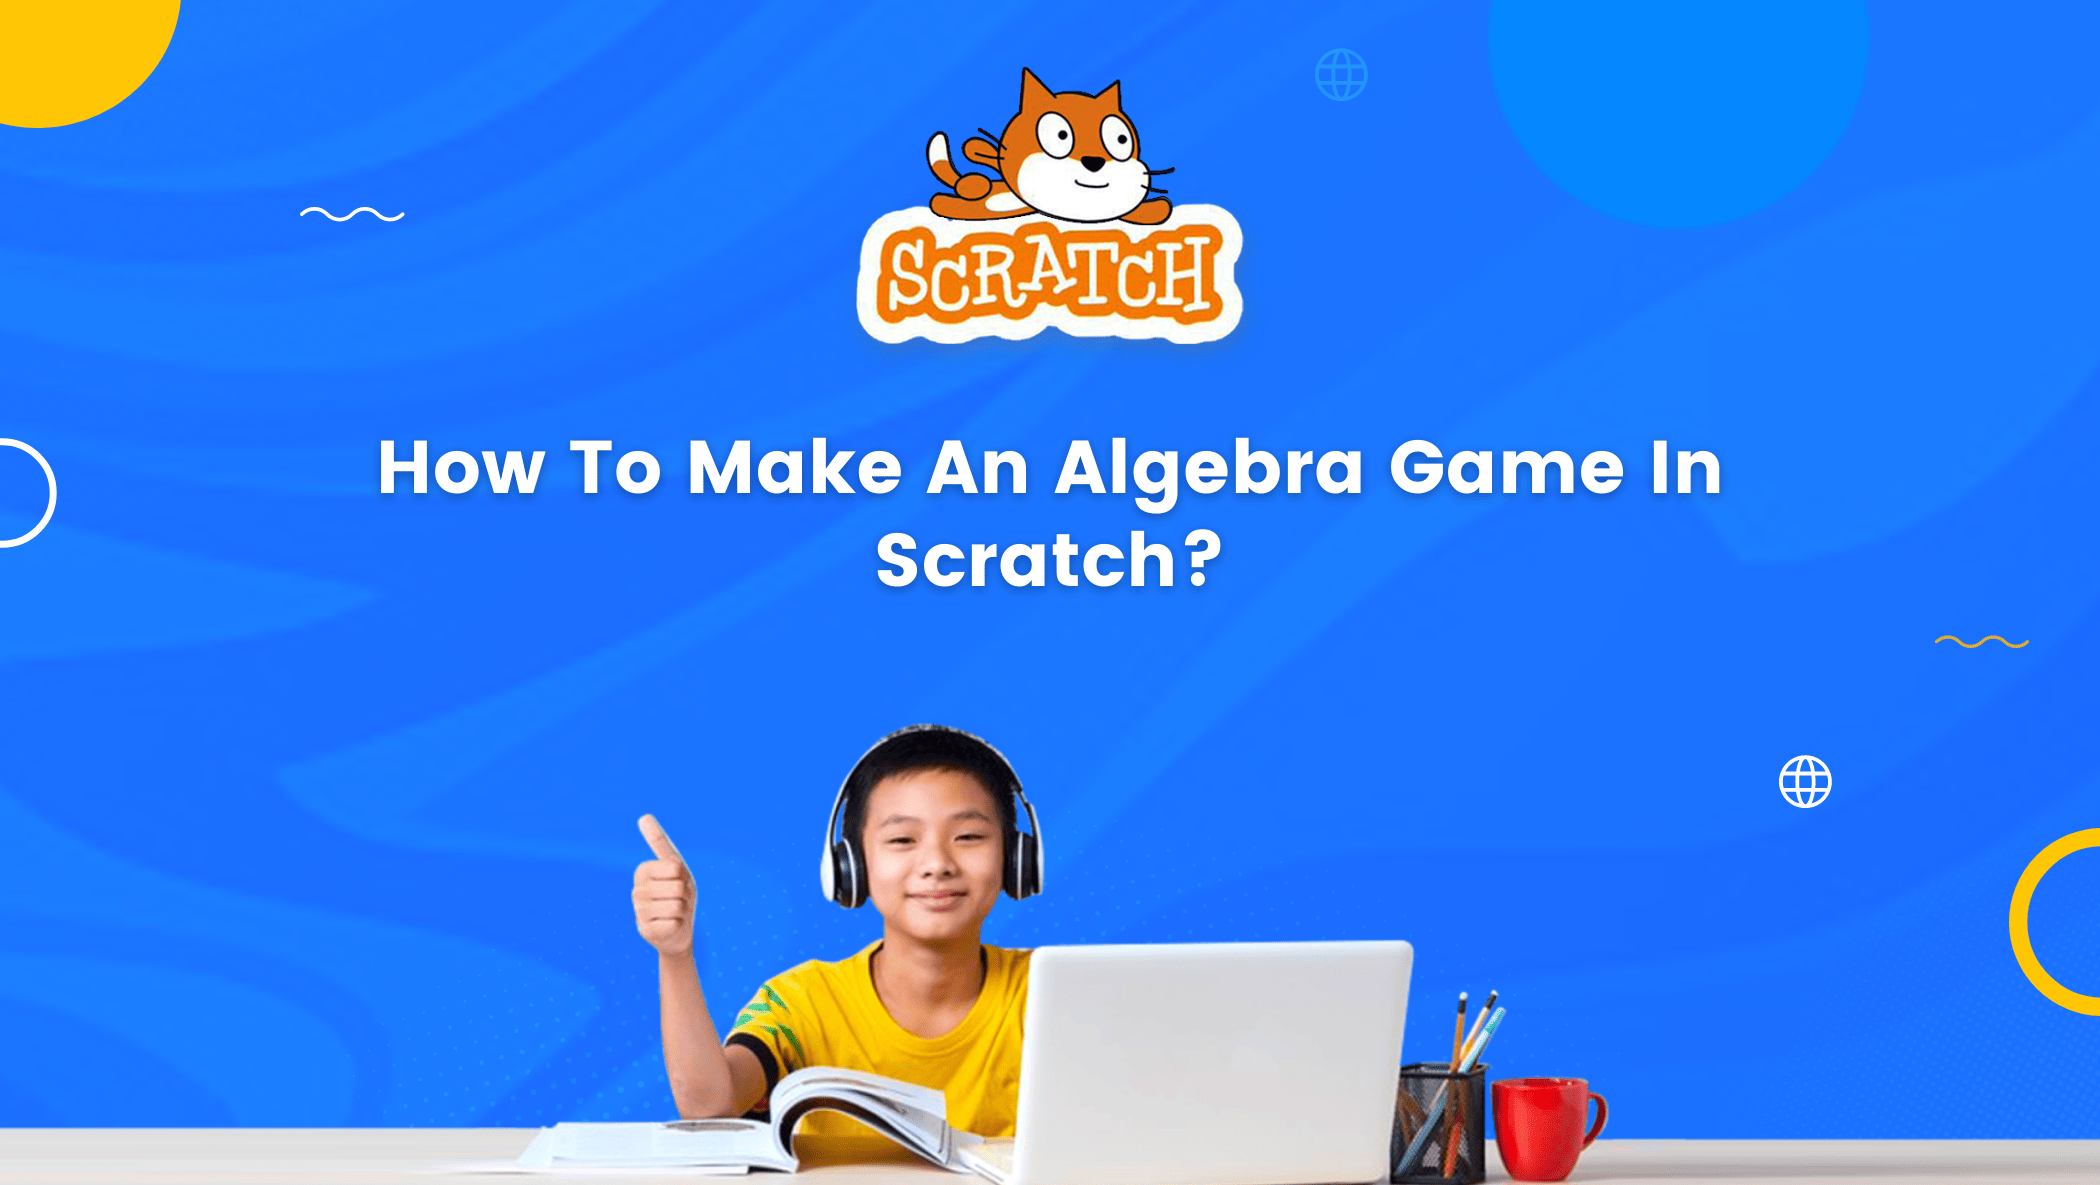 How To Make An Algebra Game In Scratch